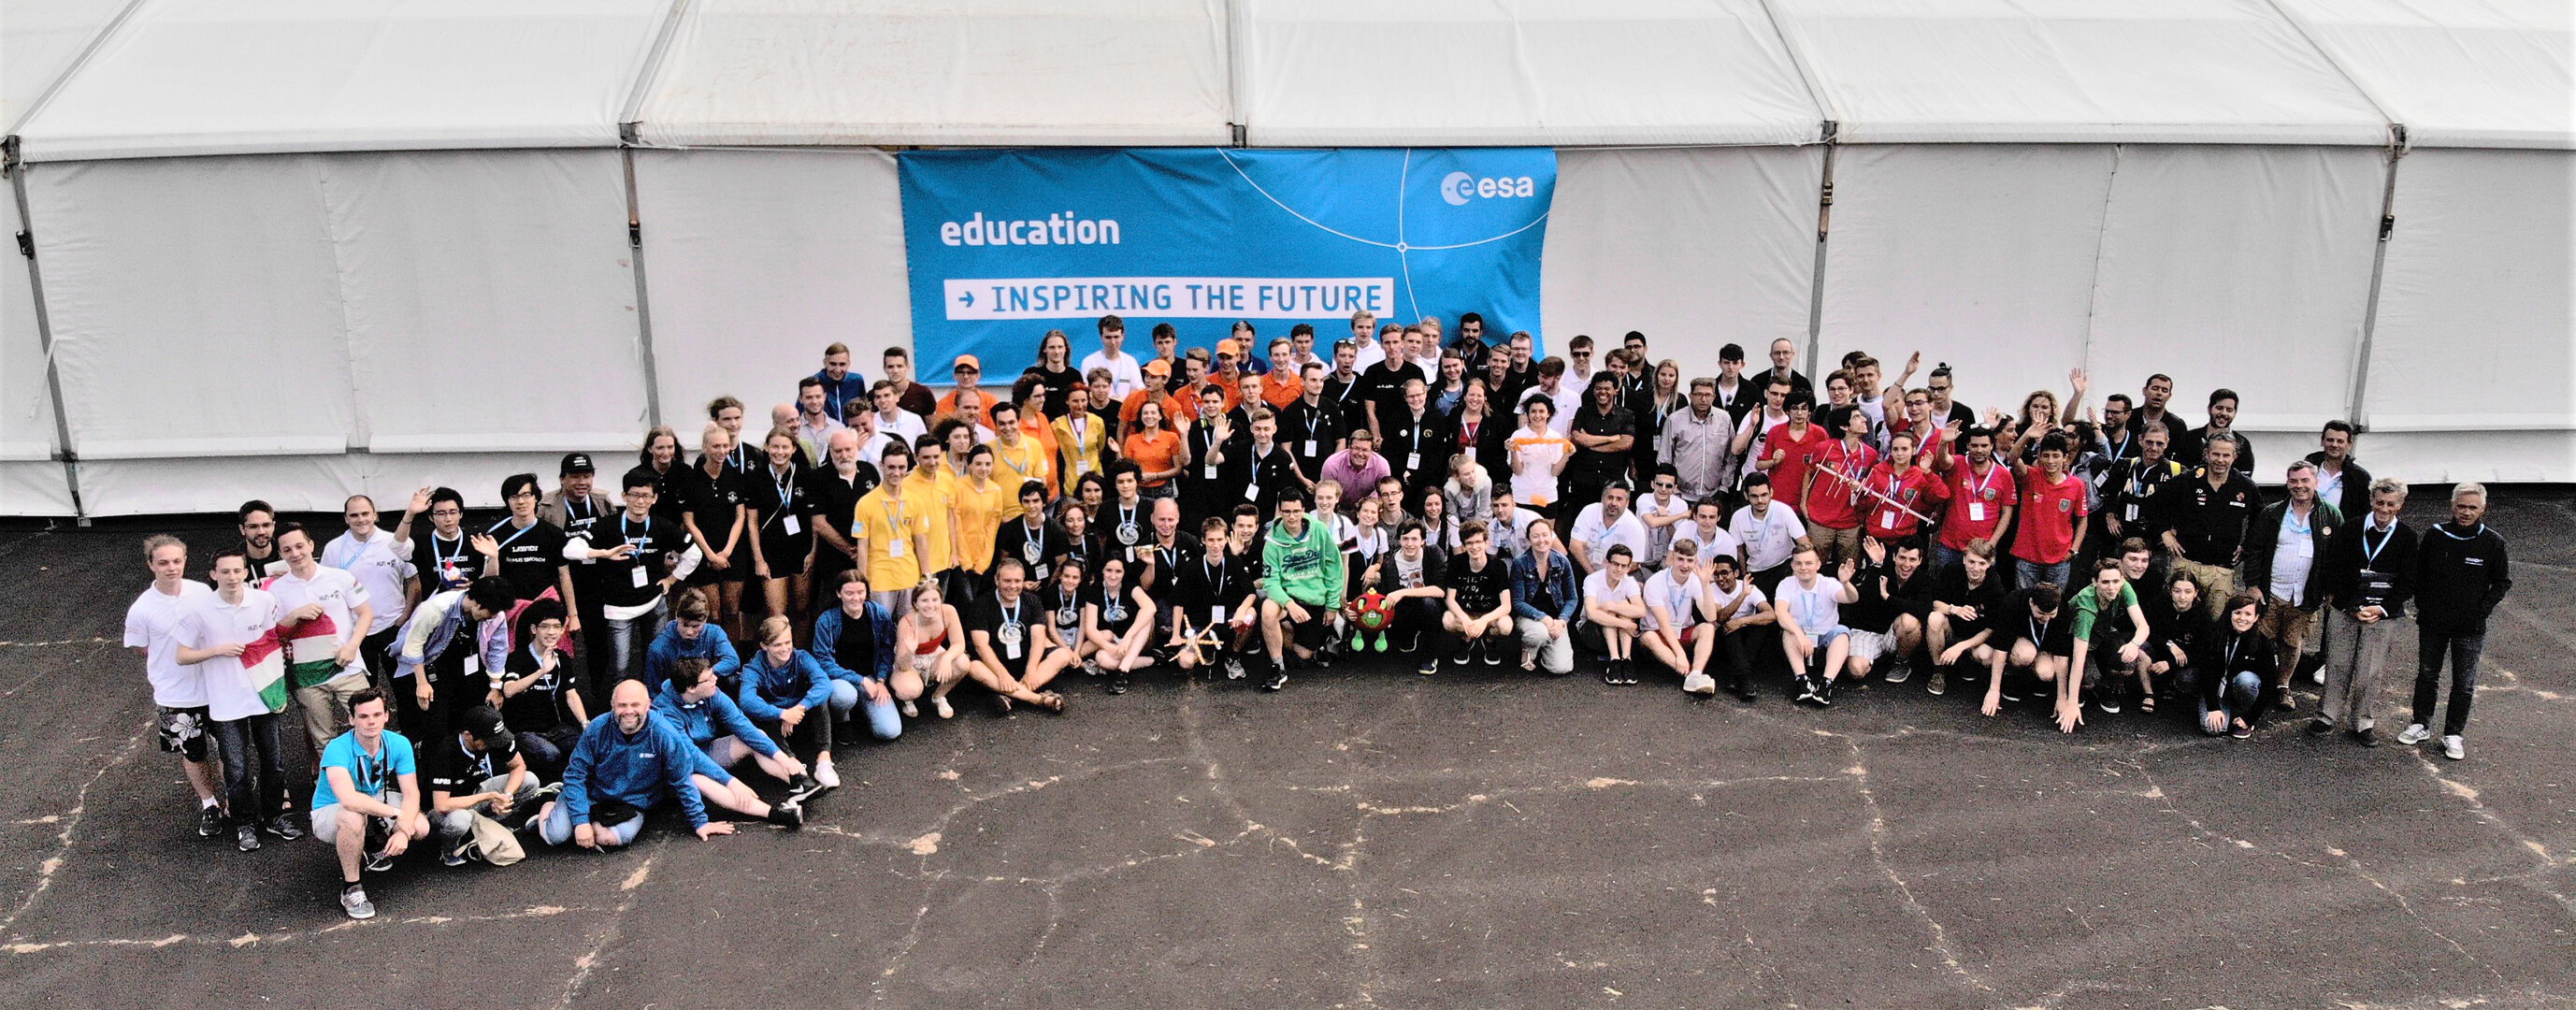 European Cansat Competition 2018 - group photo